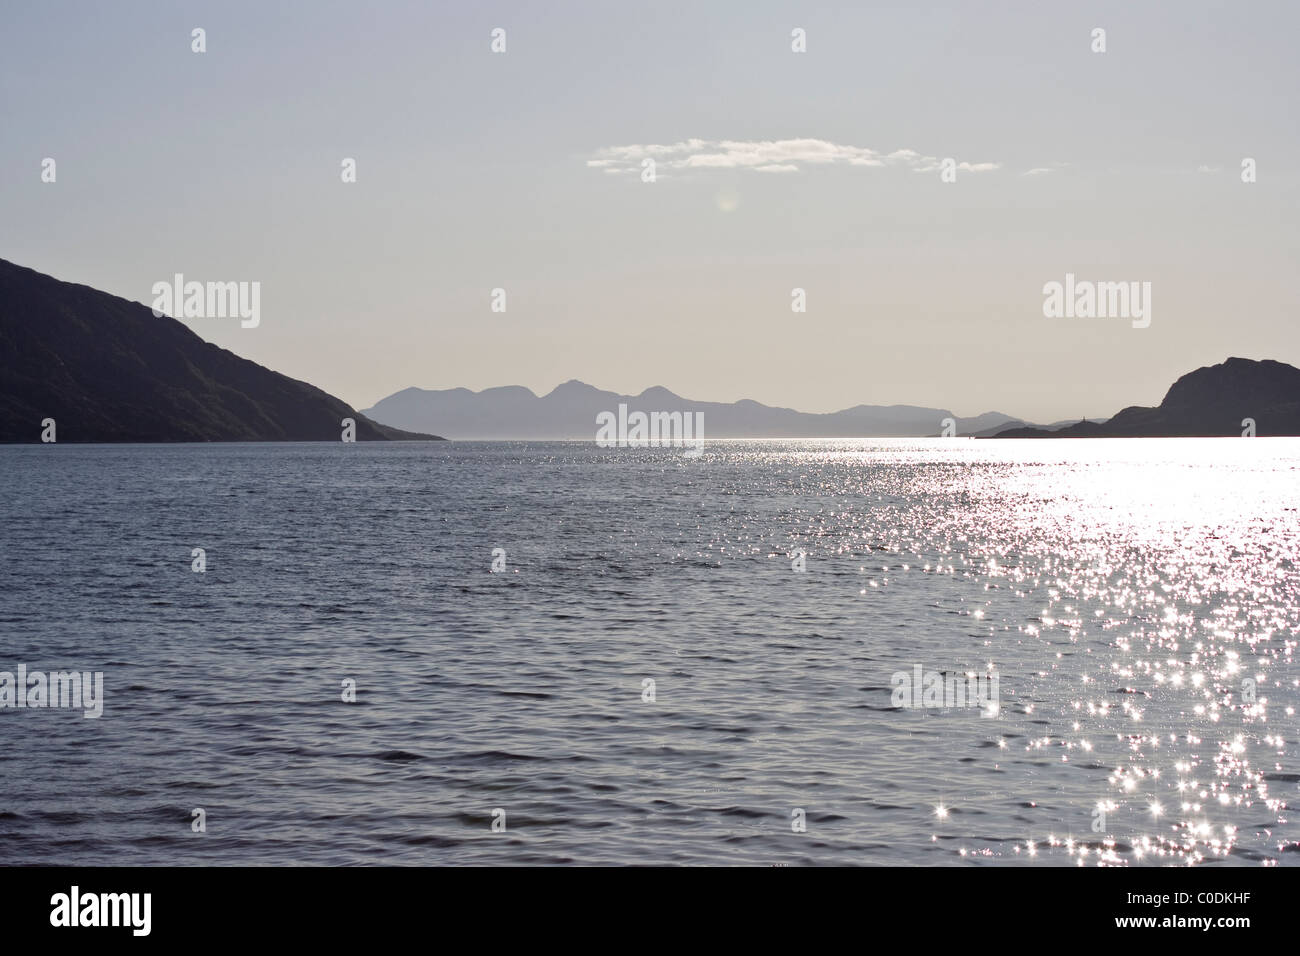 Evening sihouette of Isle of Rum from Inverie, Knoydart Stock Photo